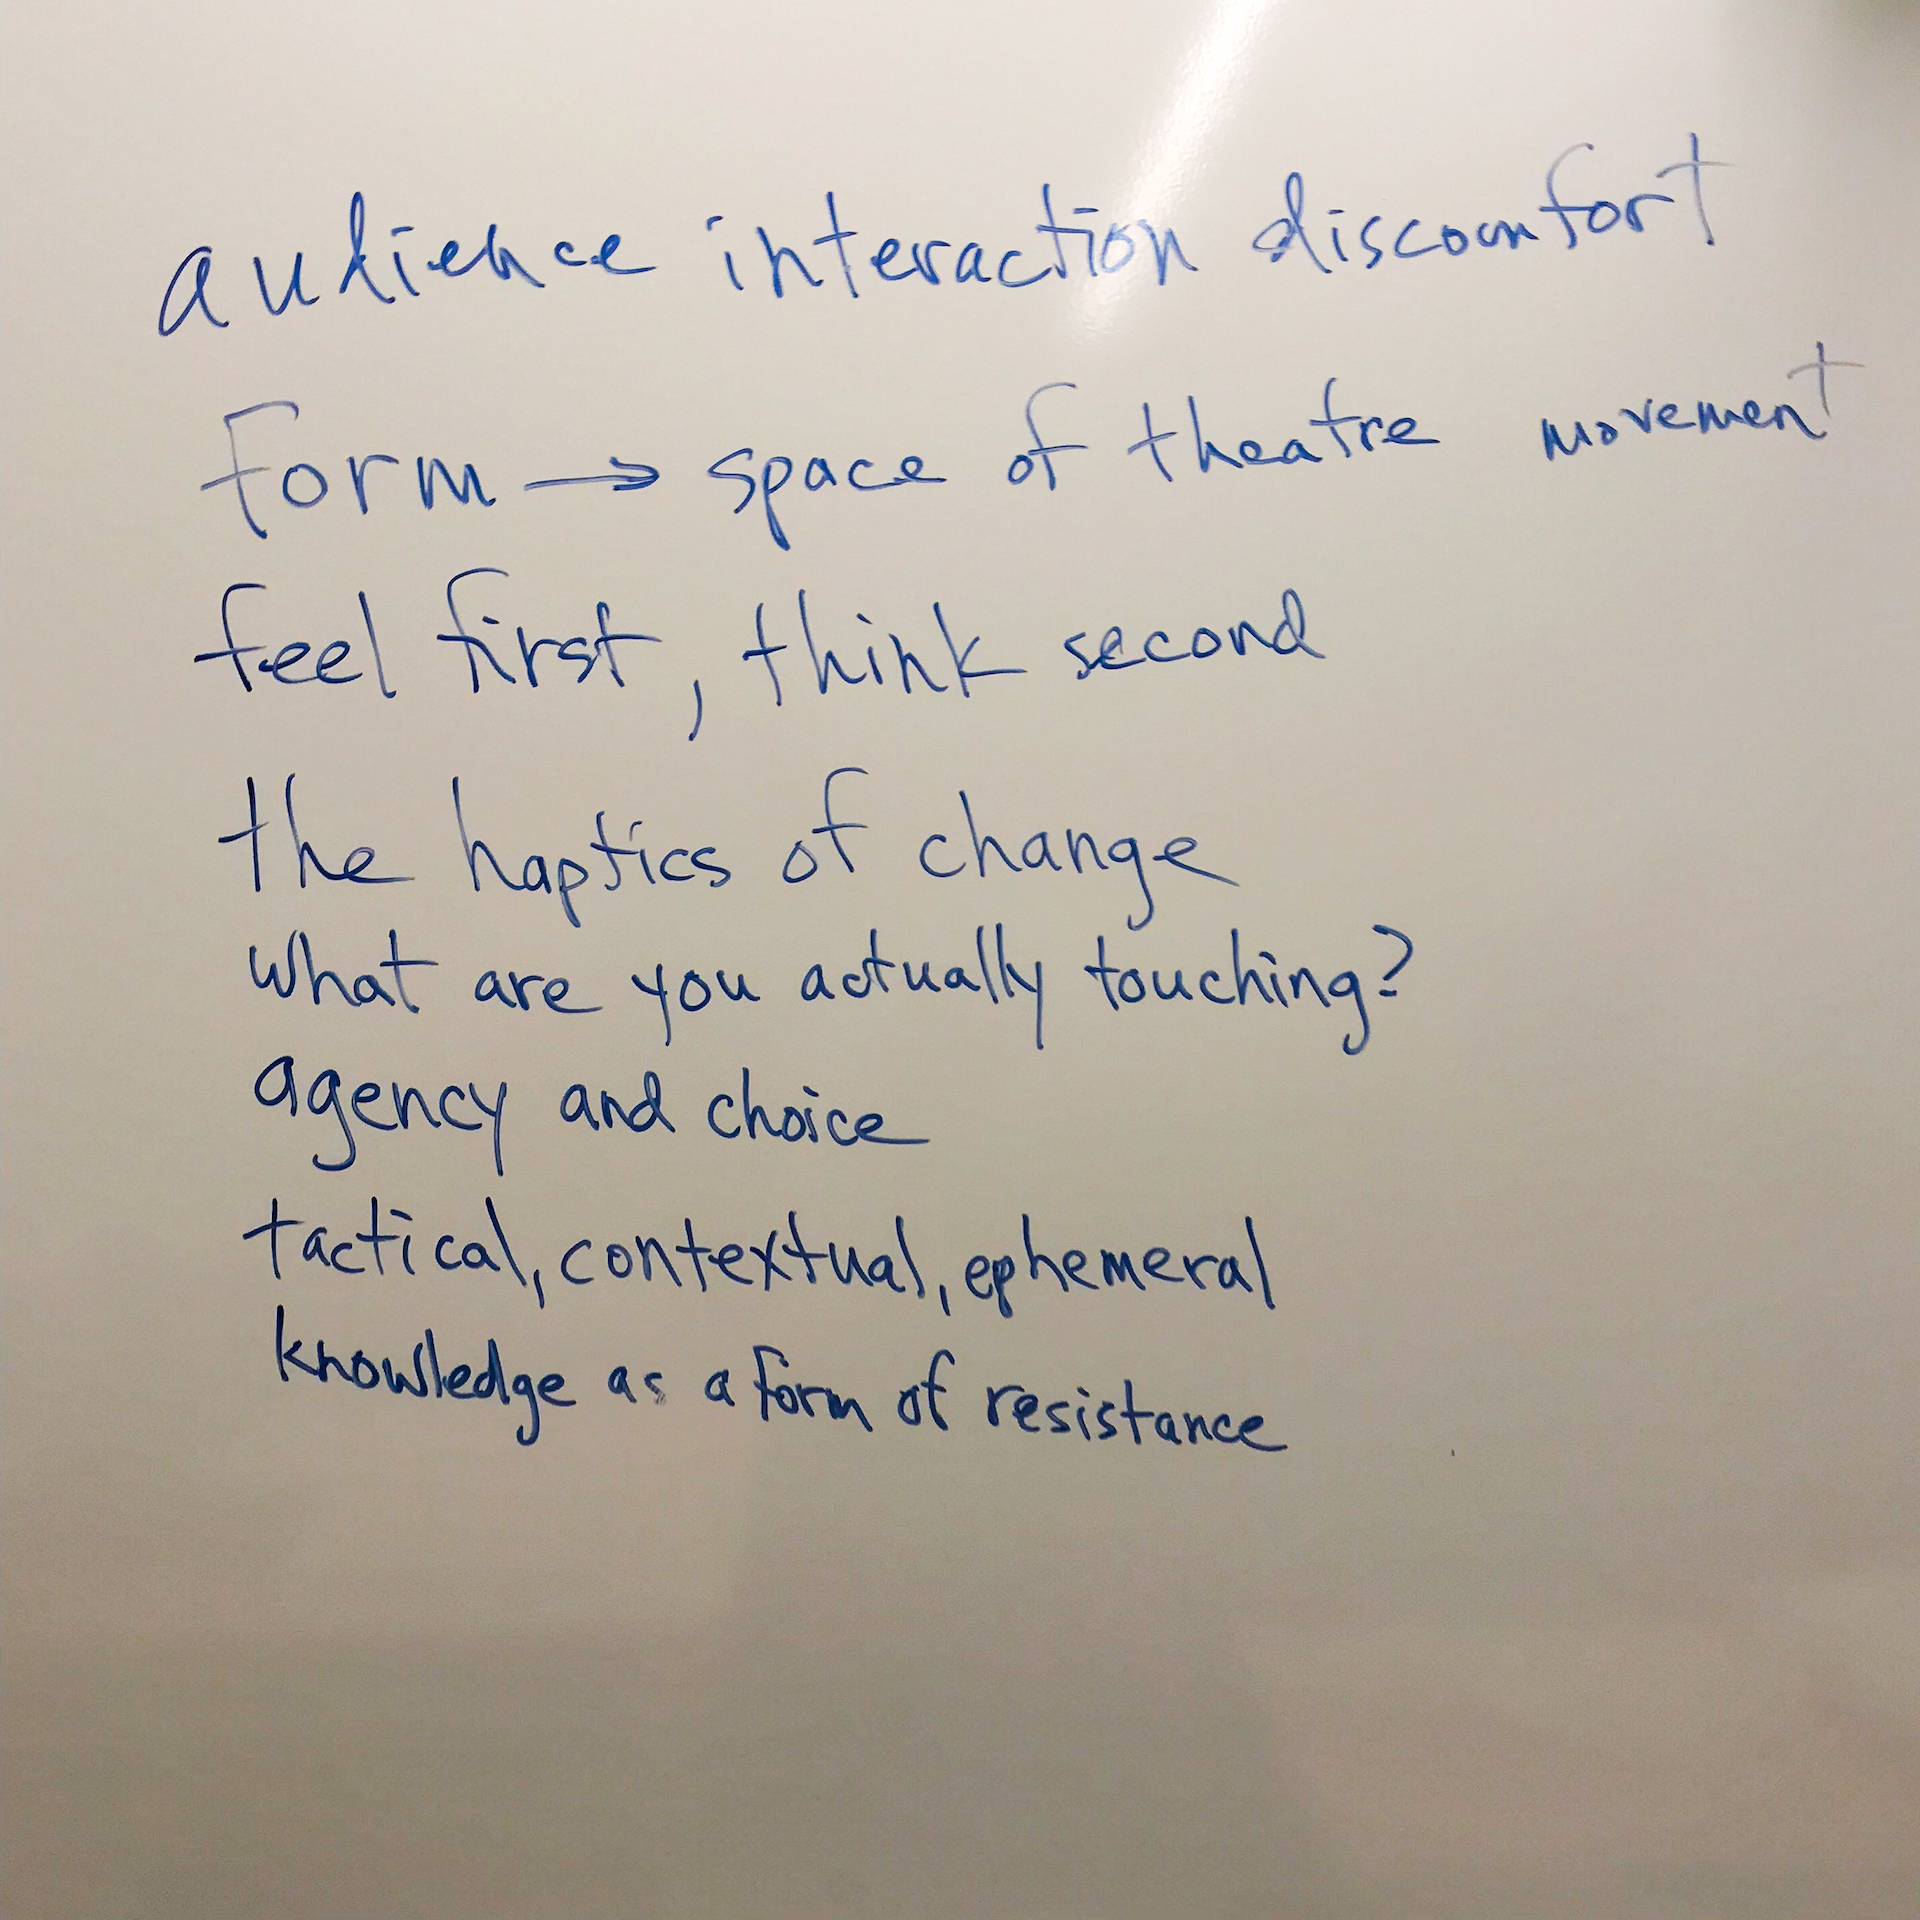 Writing on a white board that says: audience interaction discomfort, form space of theater and movement, feel first then think second, the haptics of change, what are you actually touching? Agency and choice. Tactical, contextual, ephemeral. Knowledge as a form of resistance. 